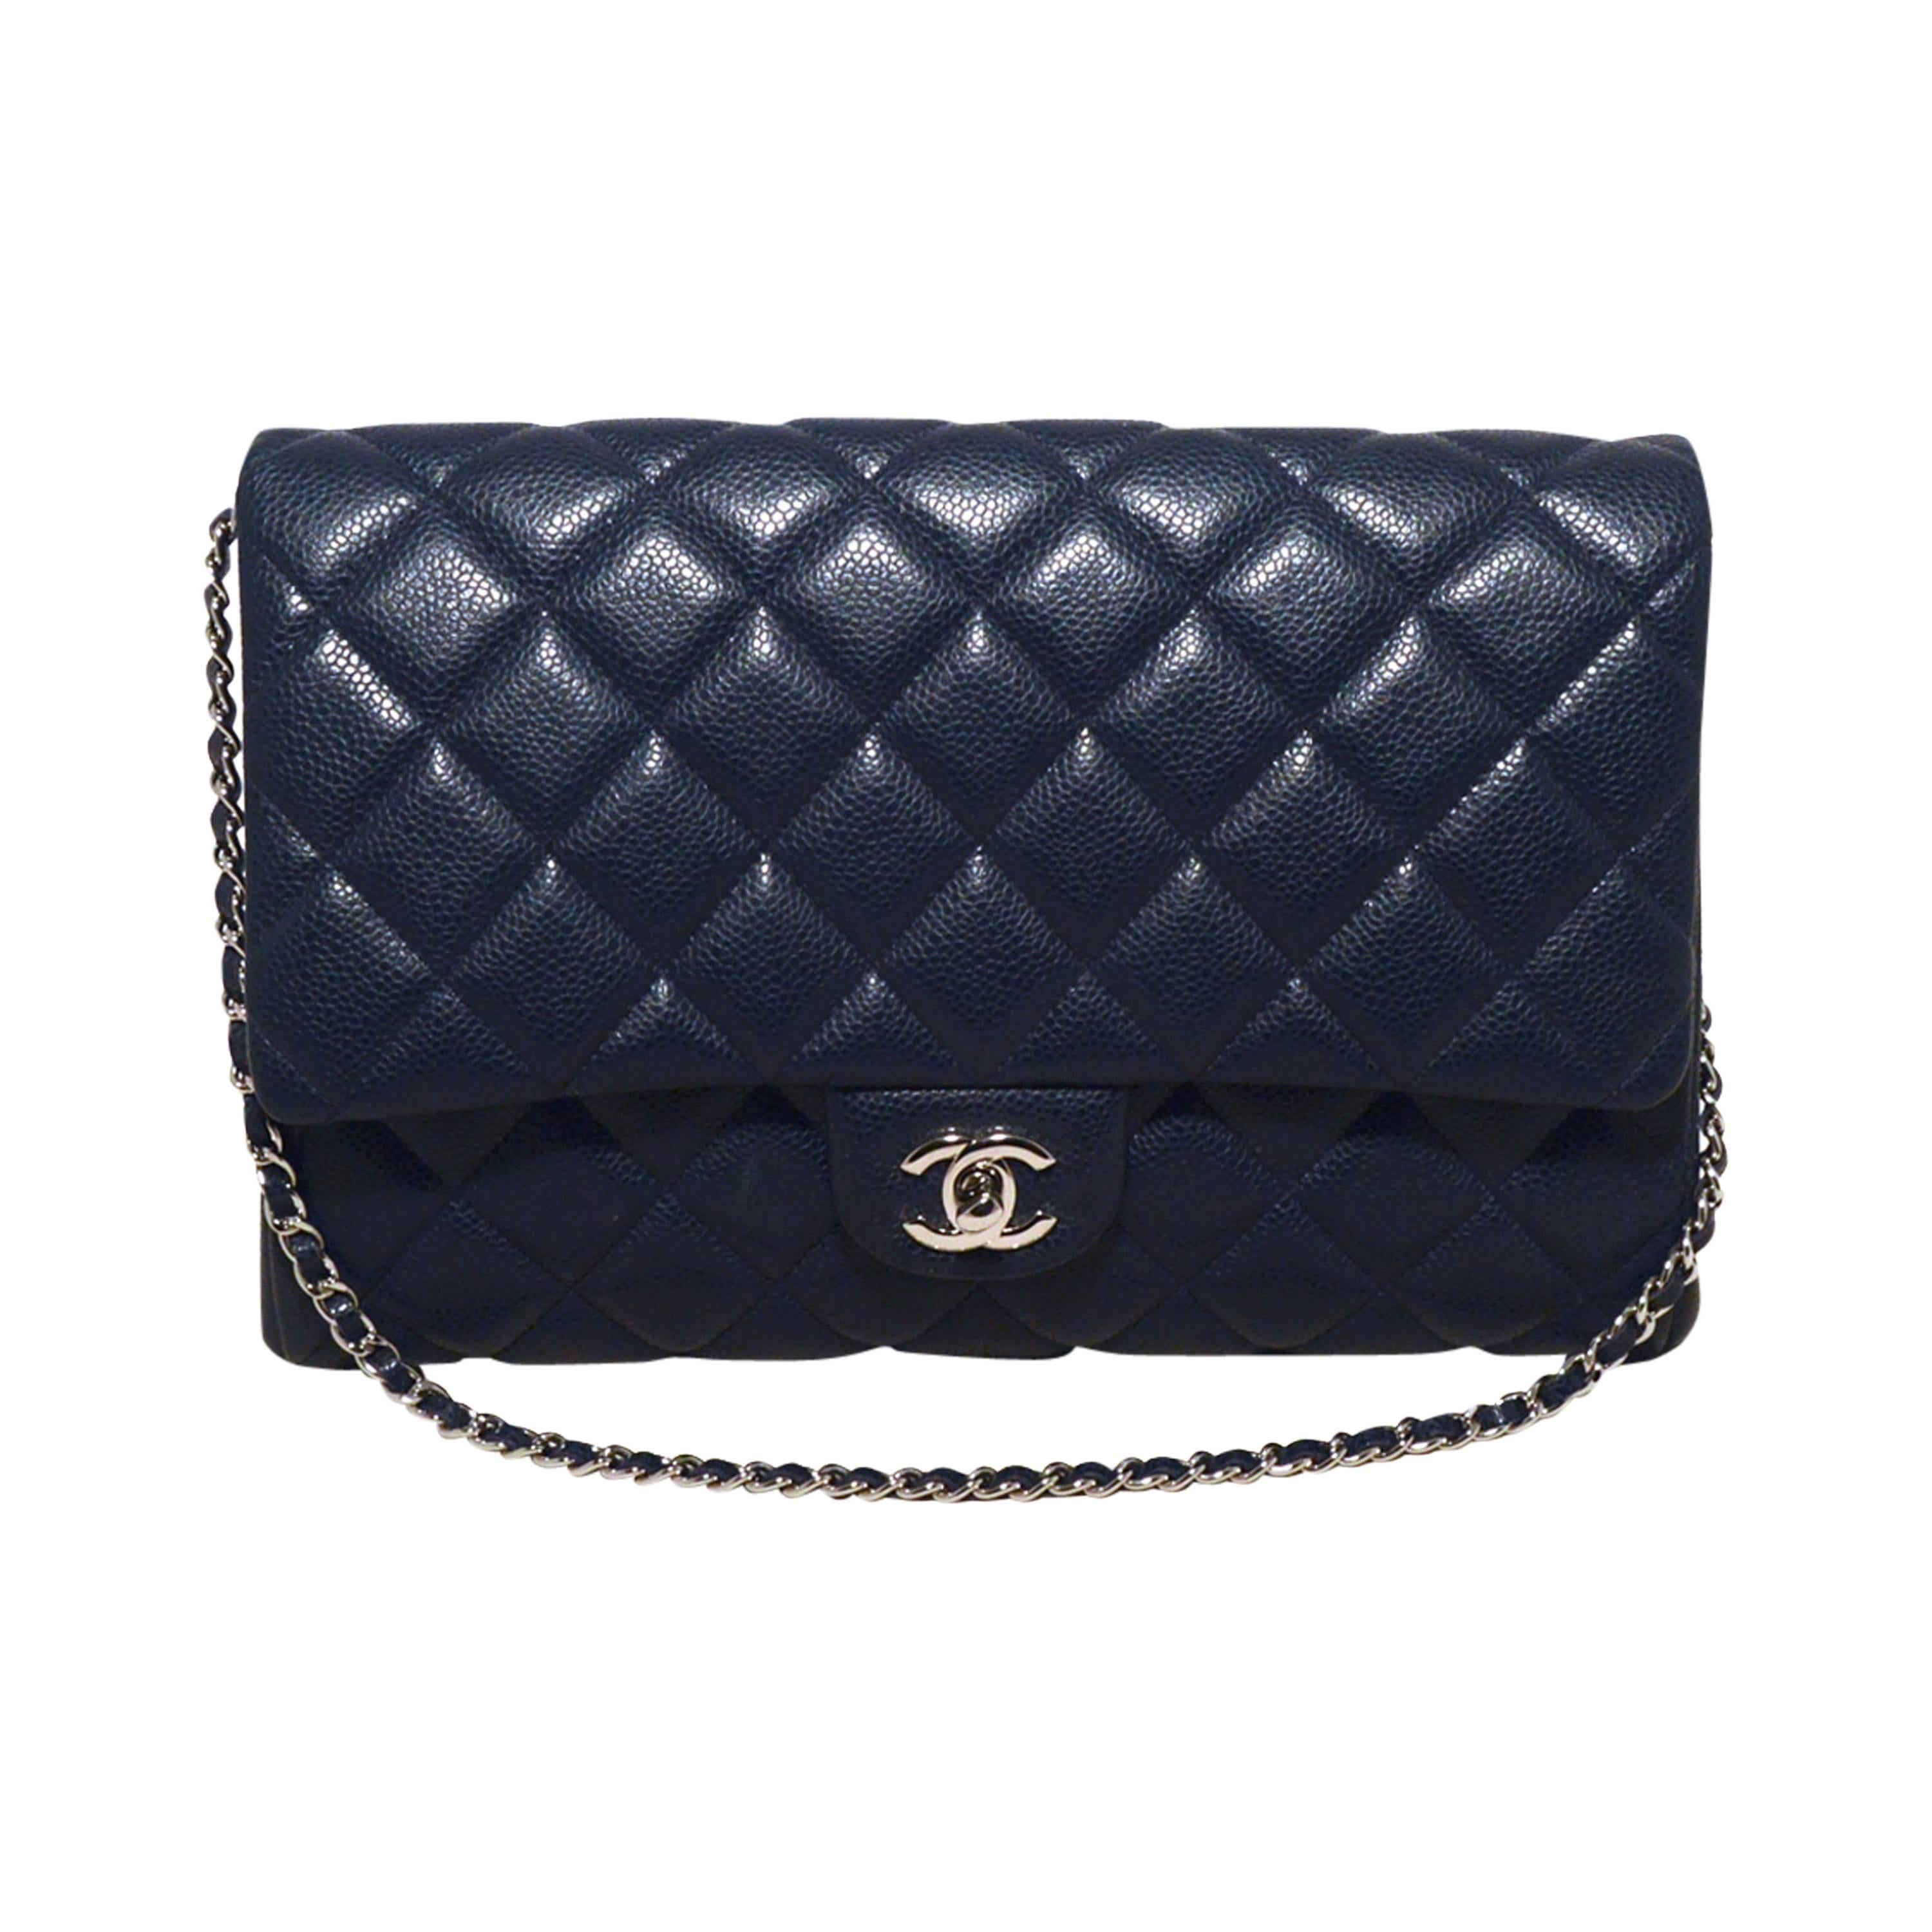 Chanel NWOT Navy Blue Classic Caviar Clutch with Chain Strap 